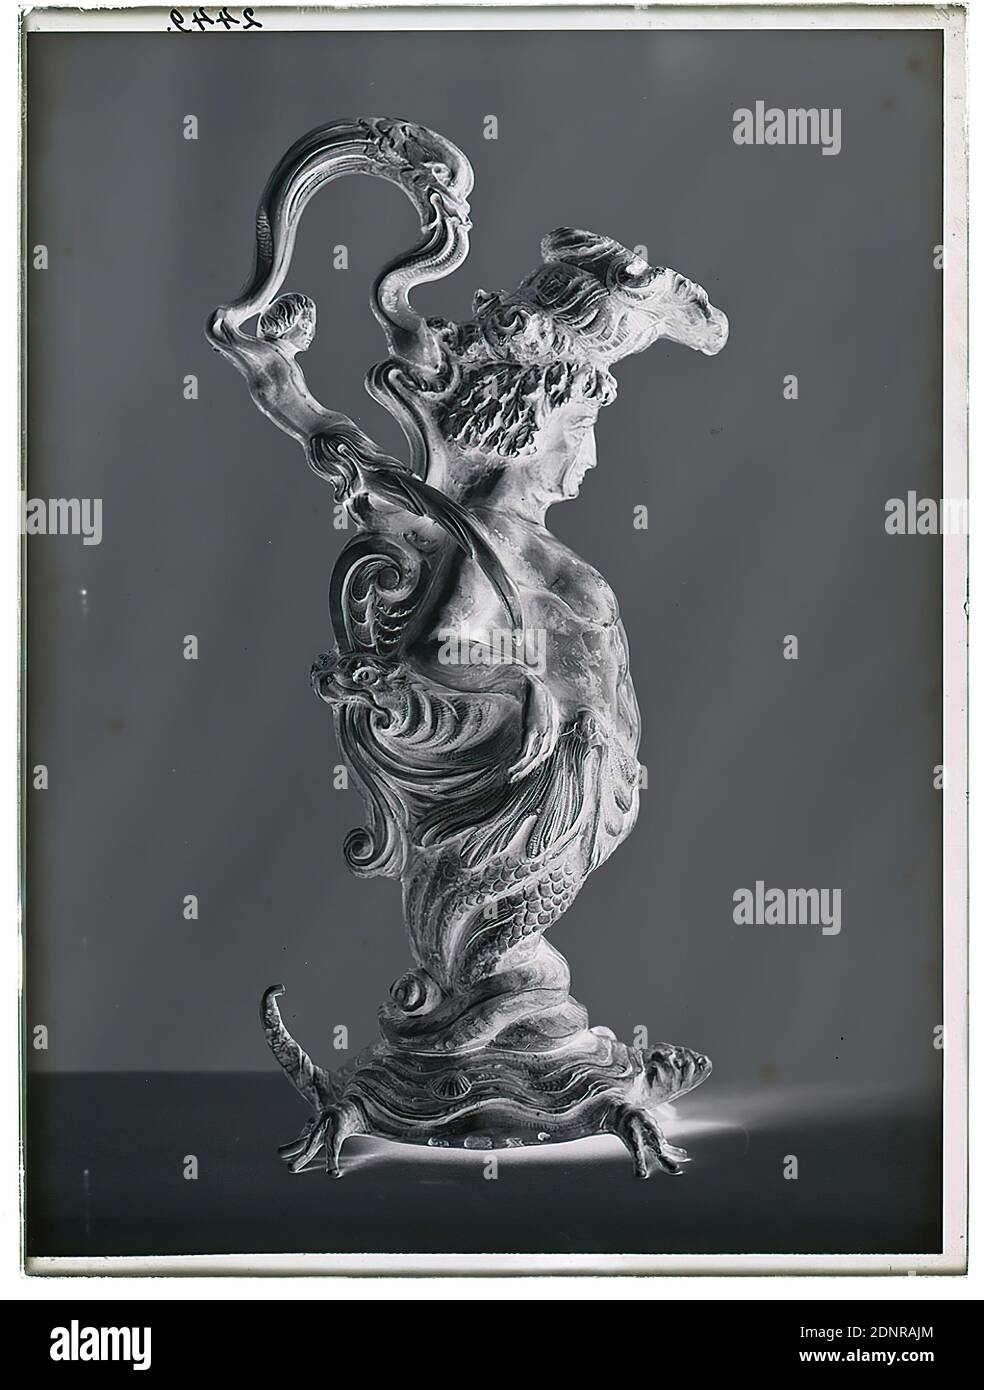 Wilhelm Weimar, jug (fake), glass negative, black and white negative process, total: height: 23,8 cm; width: 17,8 cm, numbered: top left: in black ink: 2449, photography, Work of Applied Arts (metals), Mythical creatures, Monsters, Legendary figures, Shell, Ornaments, Turtles, Sea Animals, Ornaments, Candlesticks, Candelabra Stock Photo